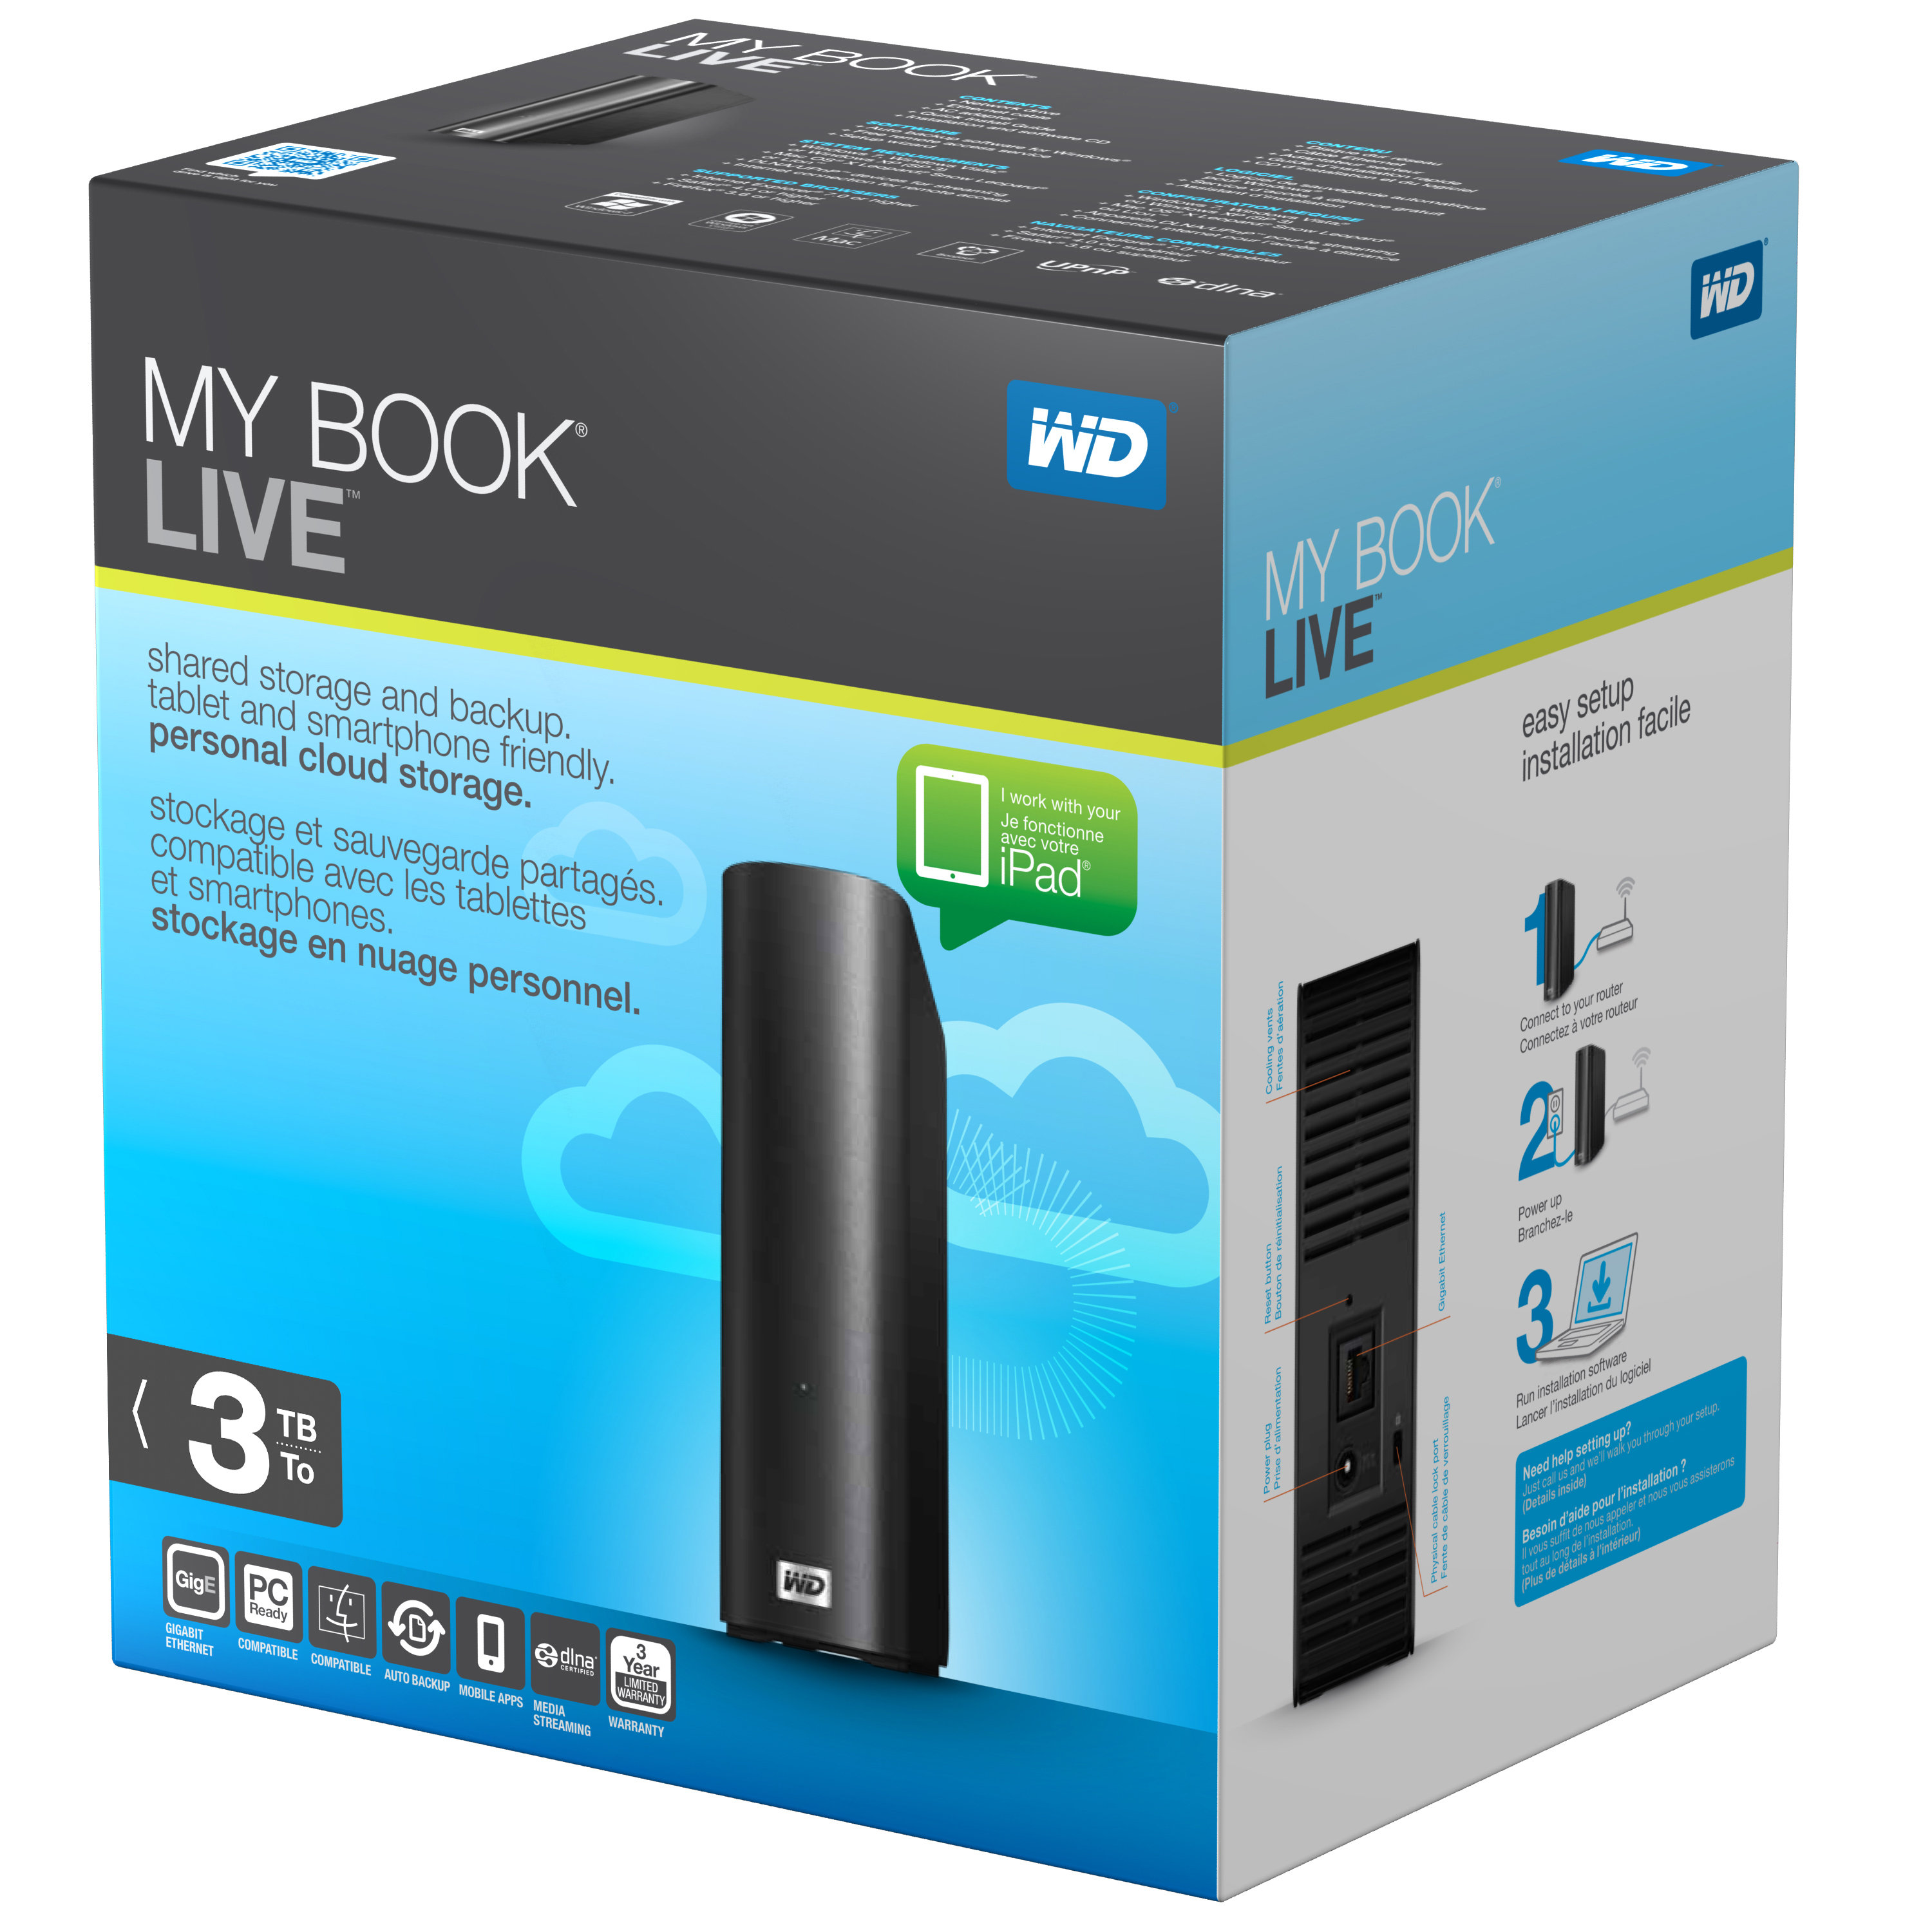 WD 3TB My Book USB  External Hard Drive .Harvey Norman price : S$ 219 .  Selling at $100, Mobile Phones & Gadgets, Mobile & Gadget Accessories,  Other Mobile & Gadget Accessories on Carousell